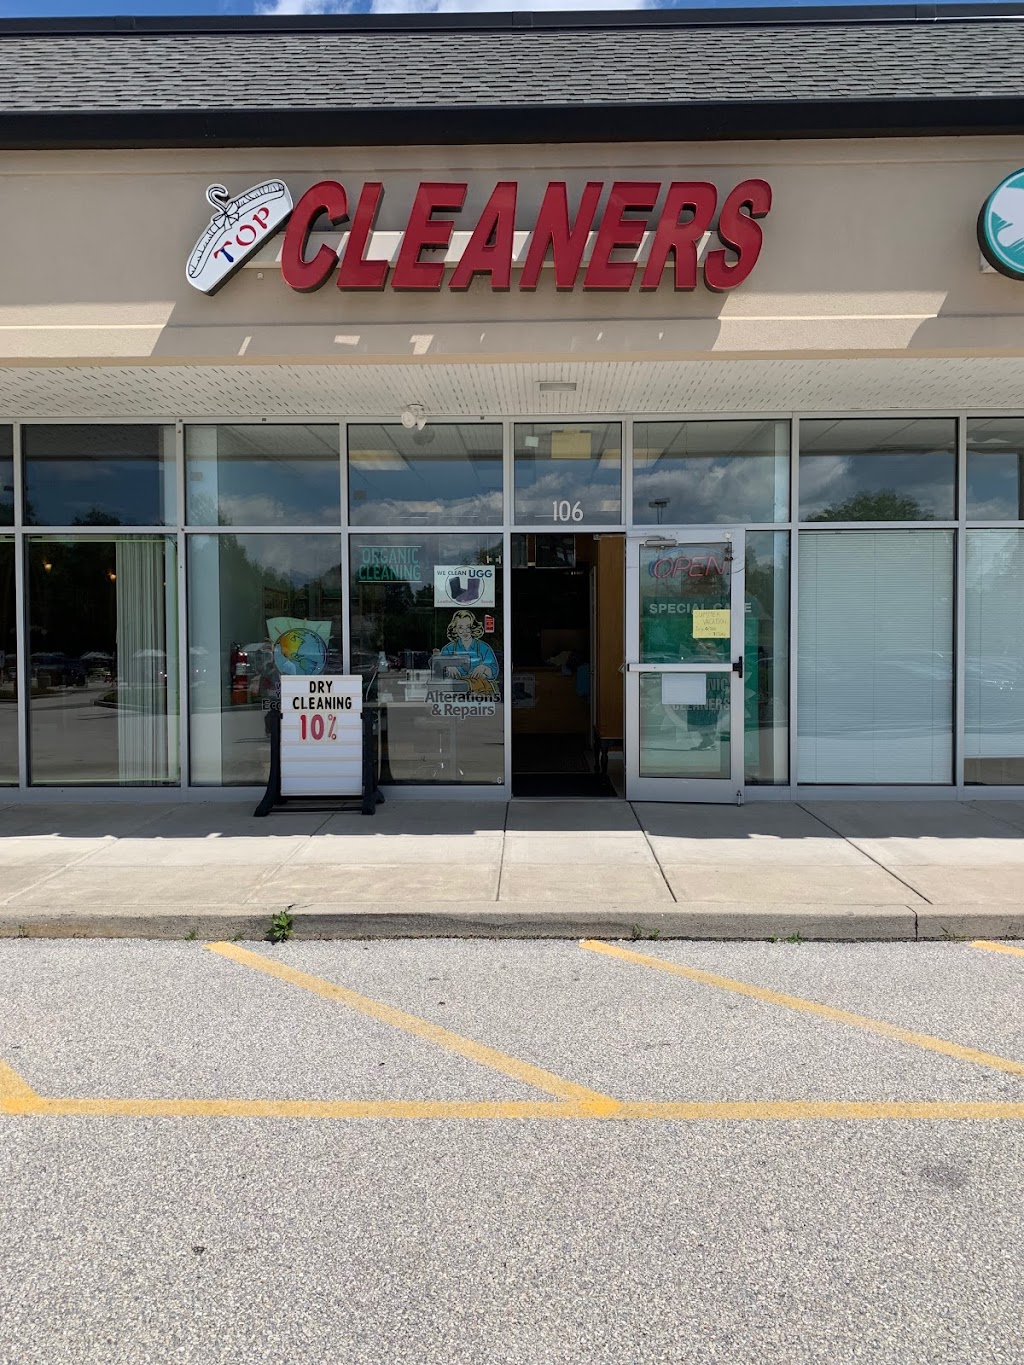 Top cleaners | 785 Starr St #106, Phoenixville, PA 19460 | Phone: (610) 917-0009